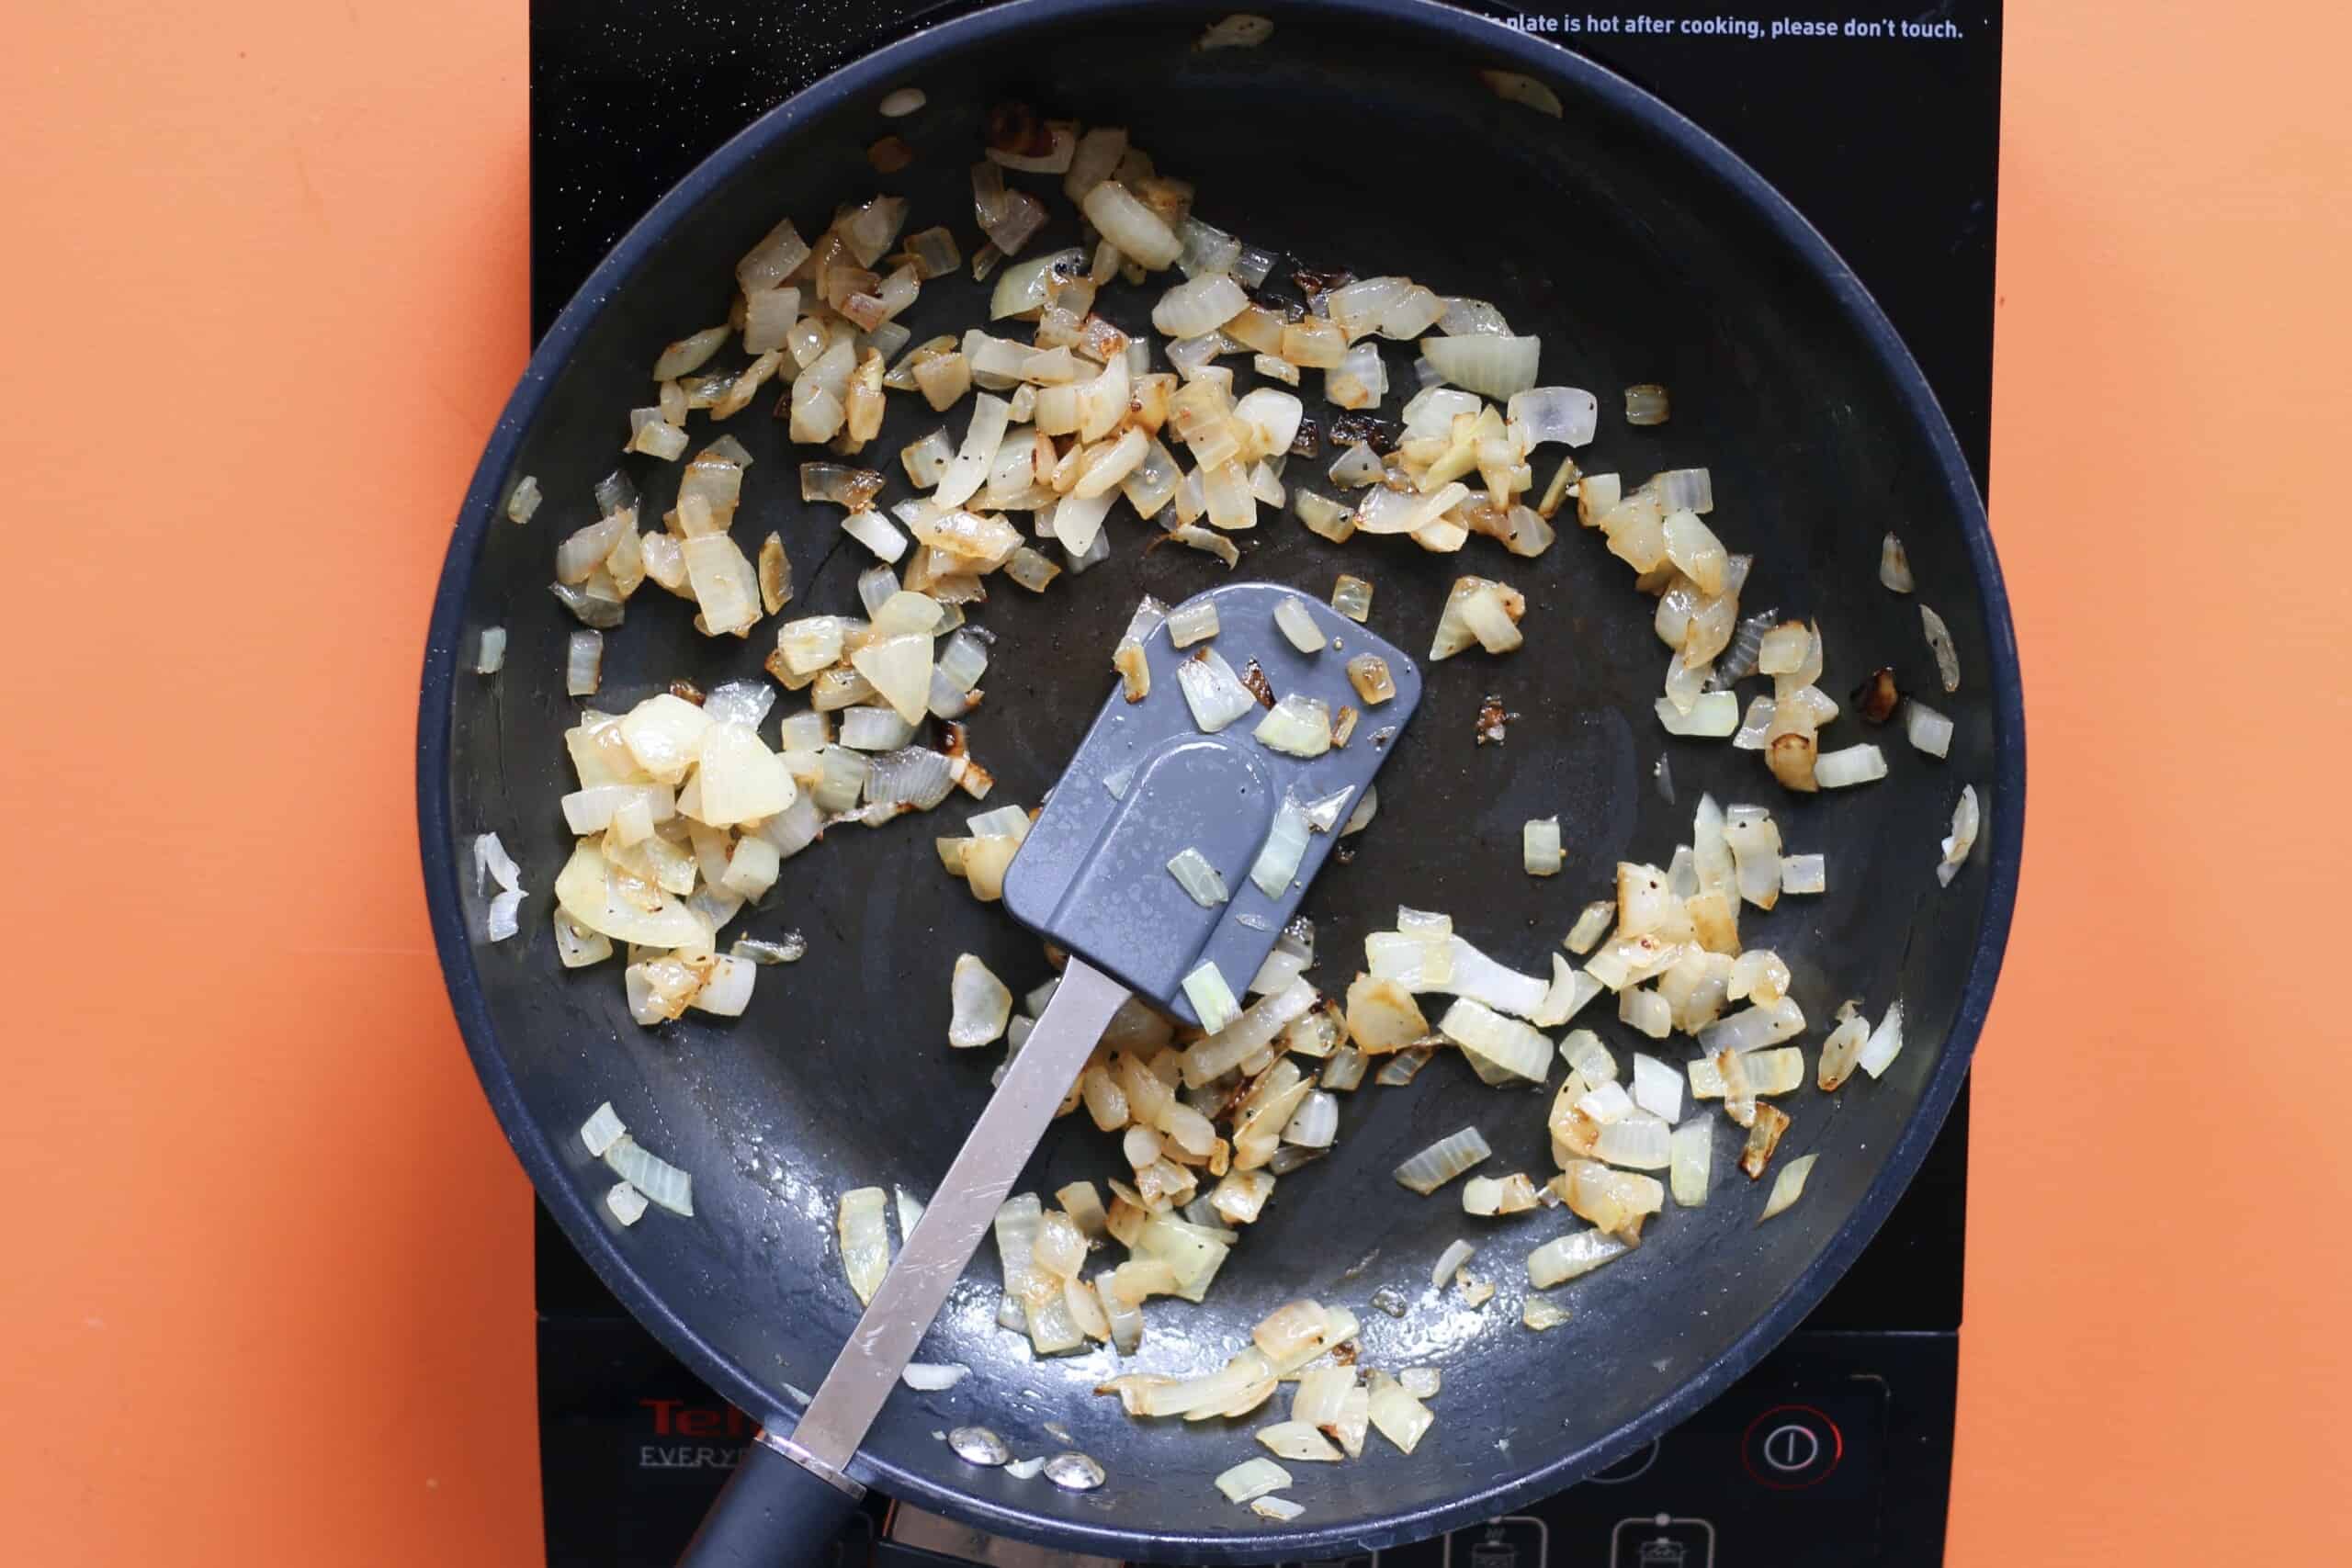 Onions sautéing in frying pan on stove with spatula.